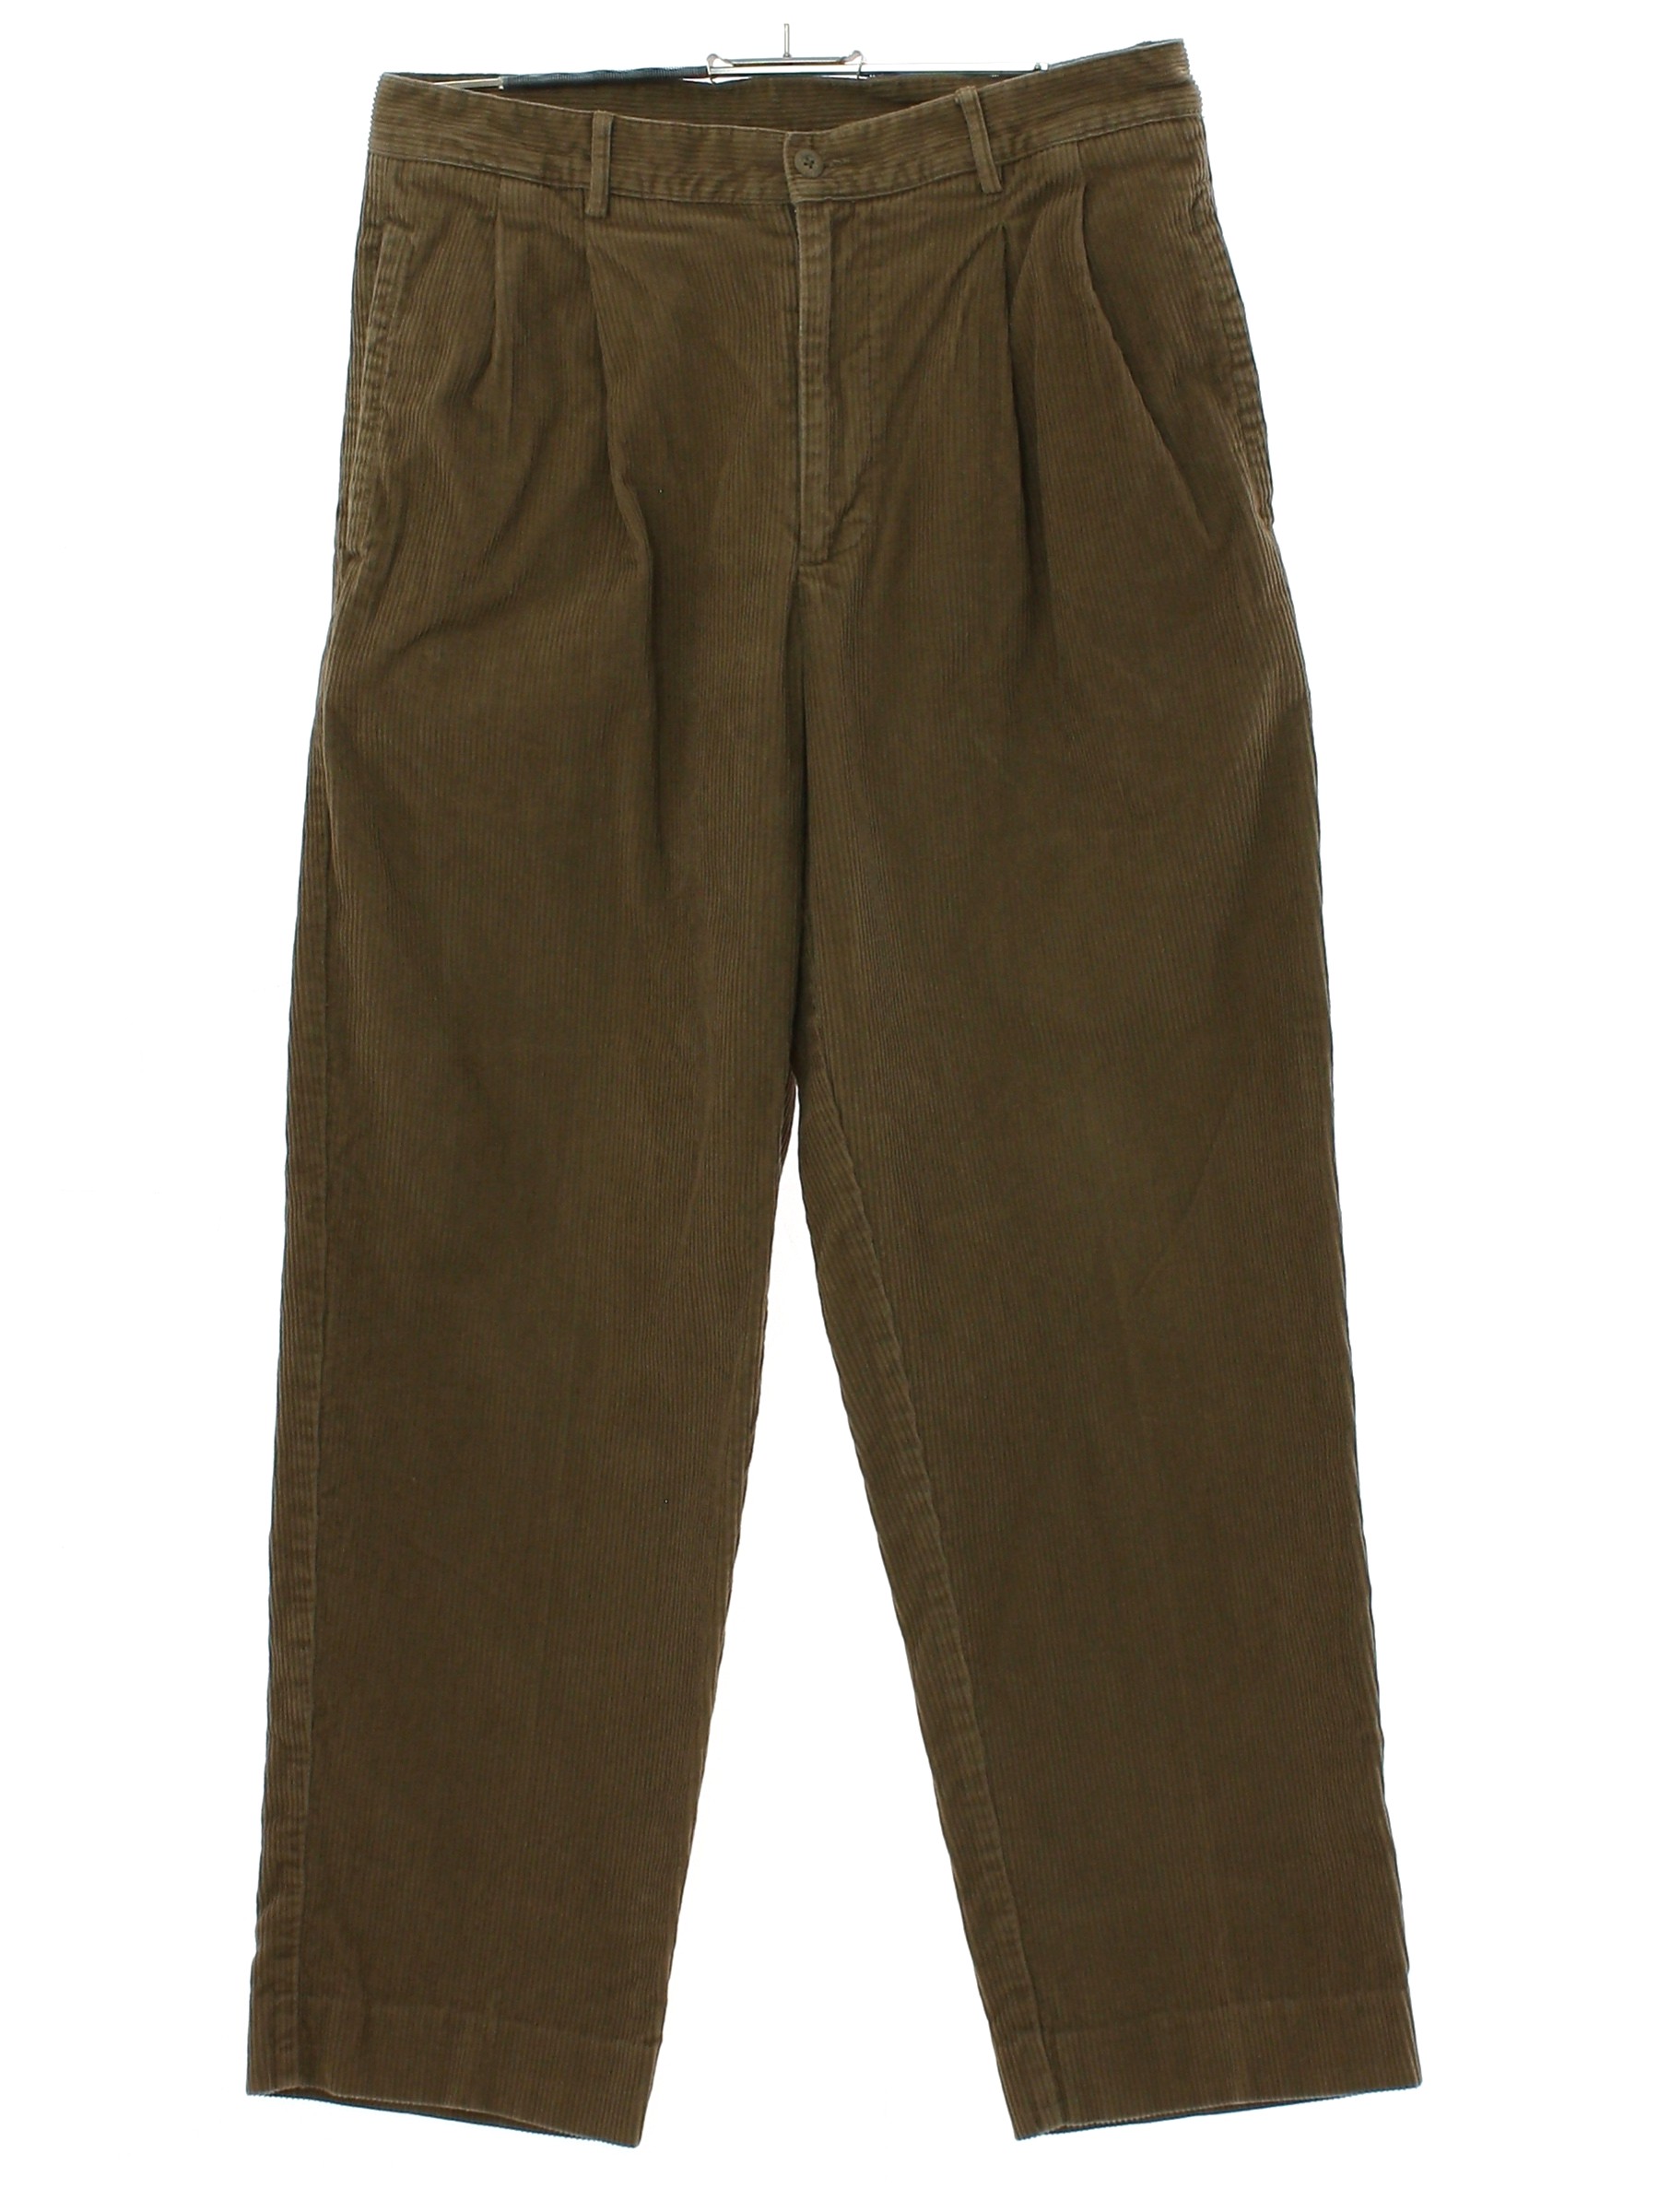 Vintage 80s Pants: Late 80s -Care Label- Mens mocha brown solid colored ...